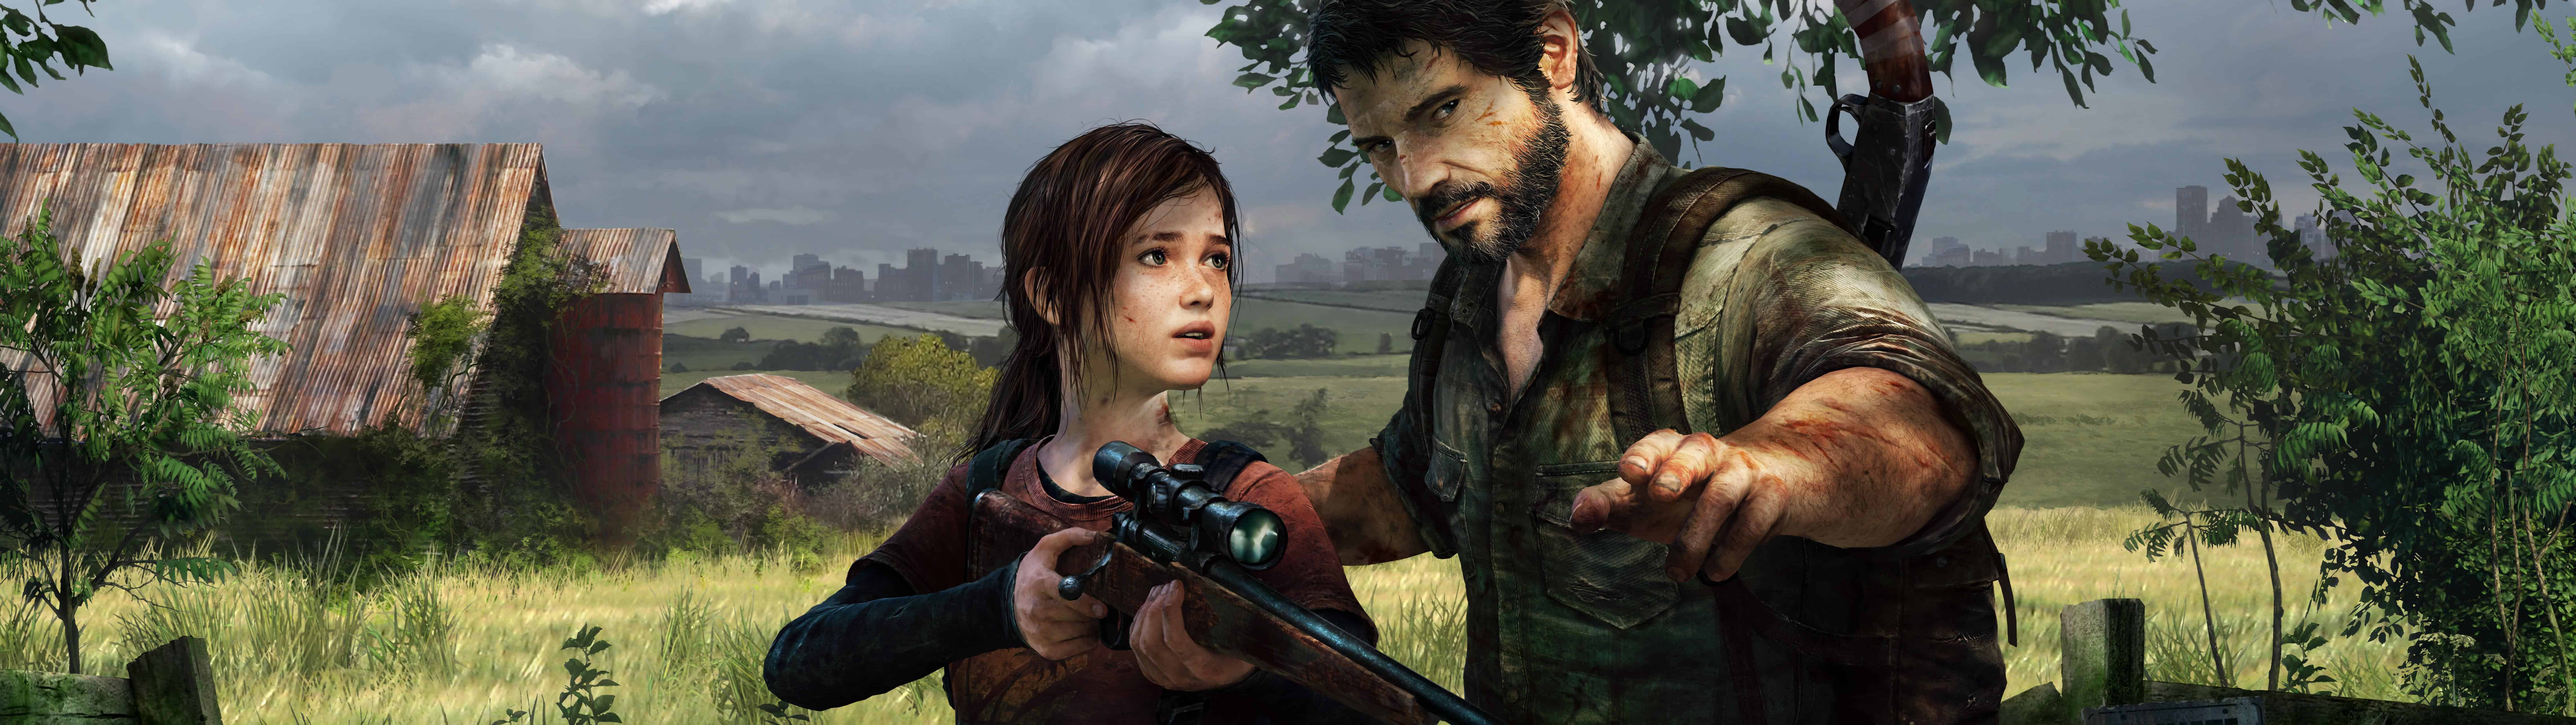 the last of us wallpaper,action adventure game,movie,shooter game,games,adventure game